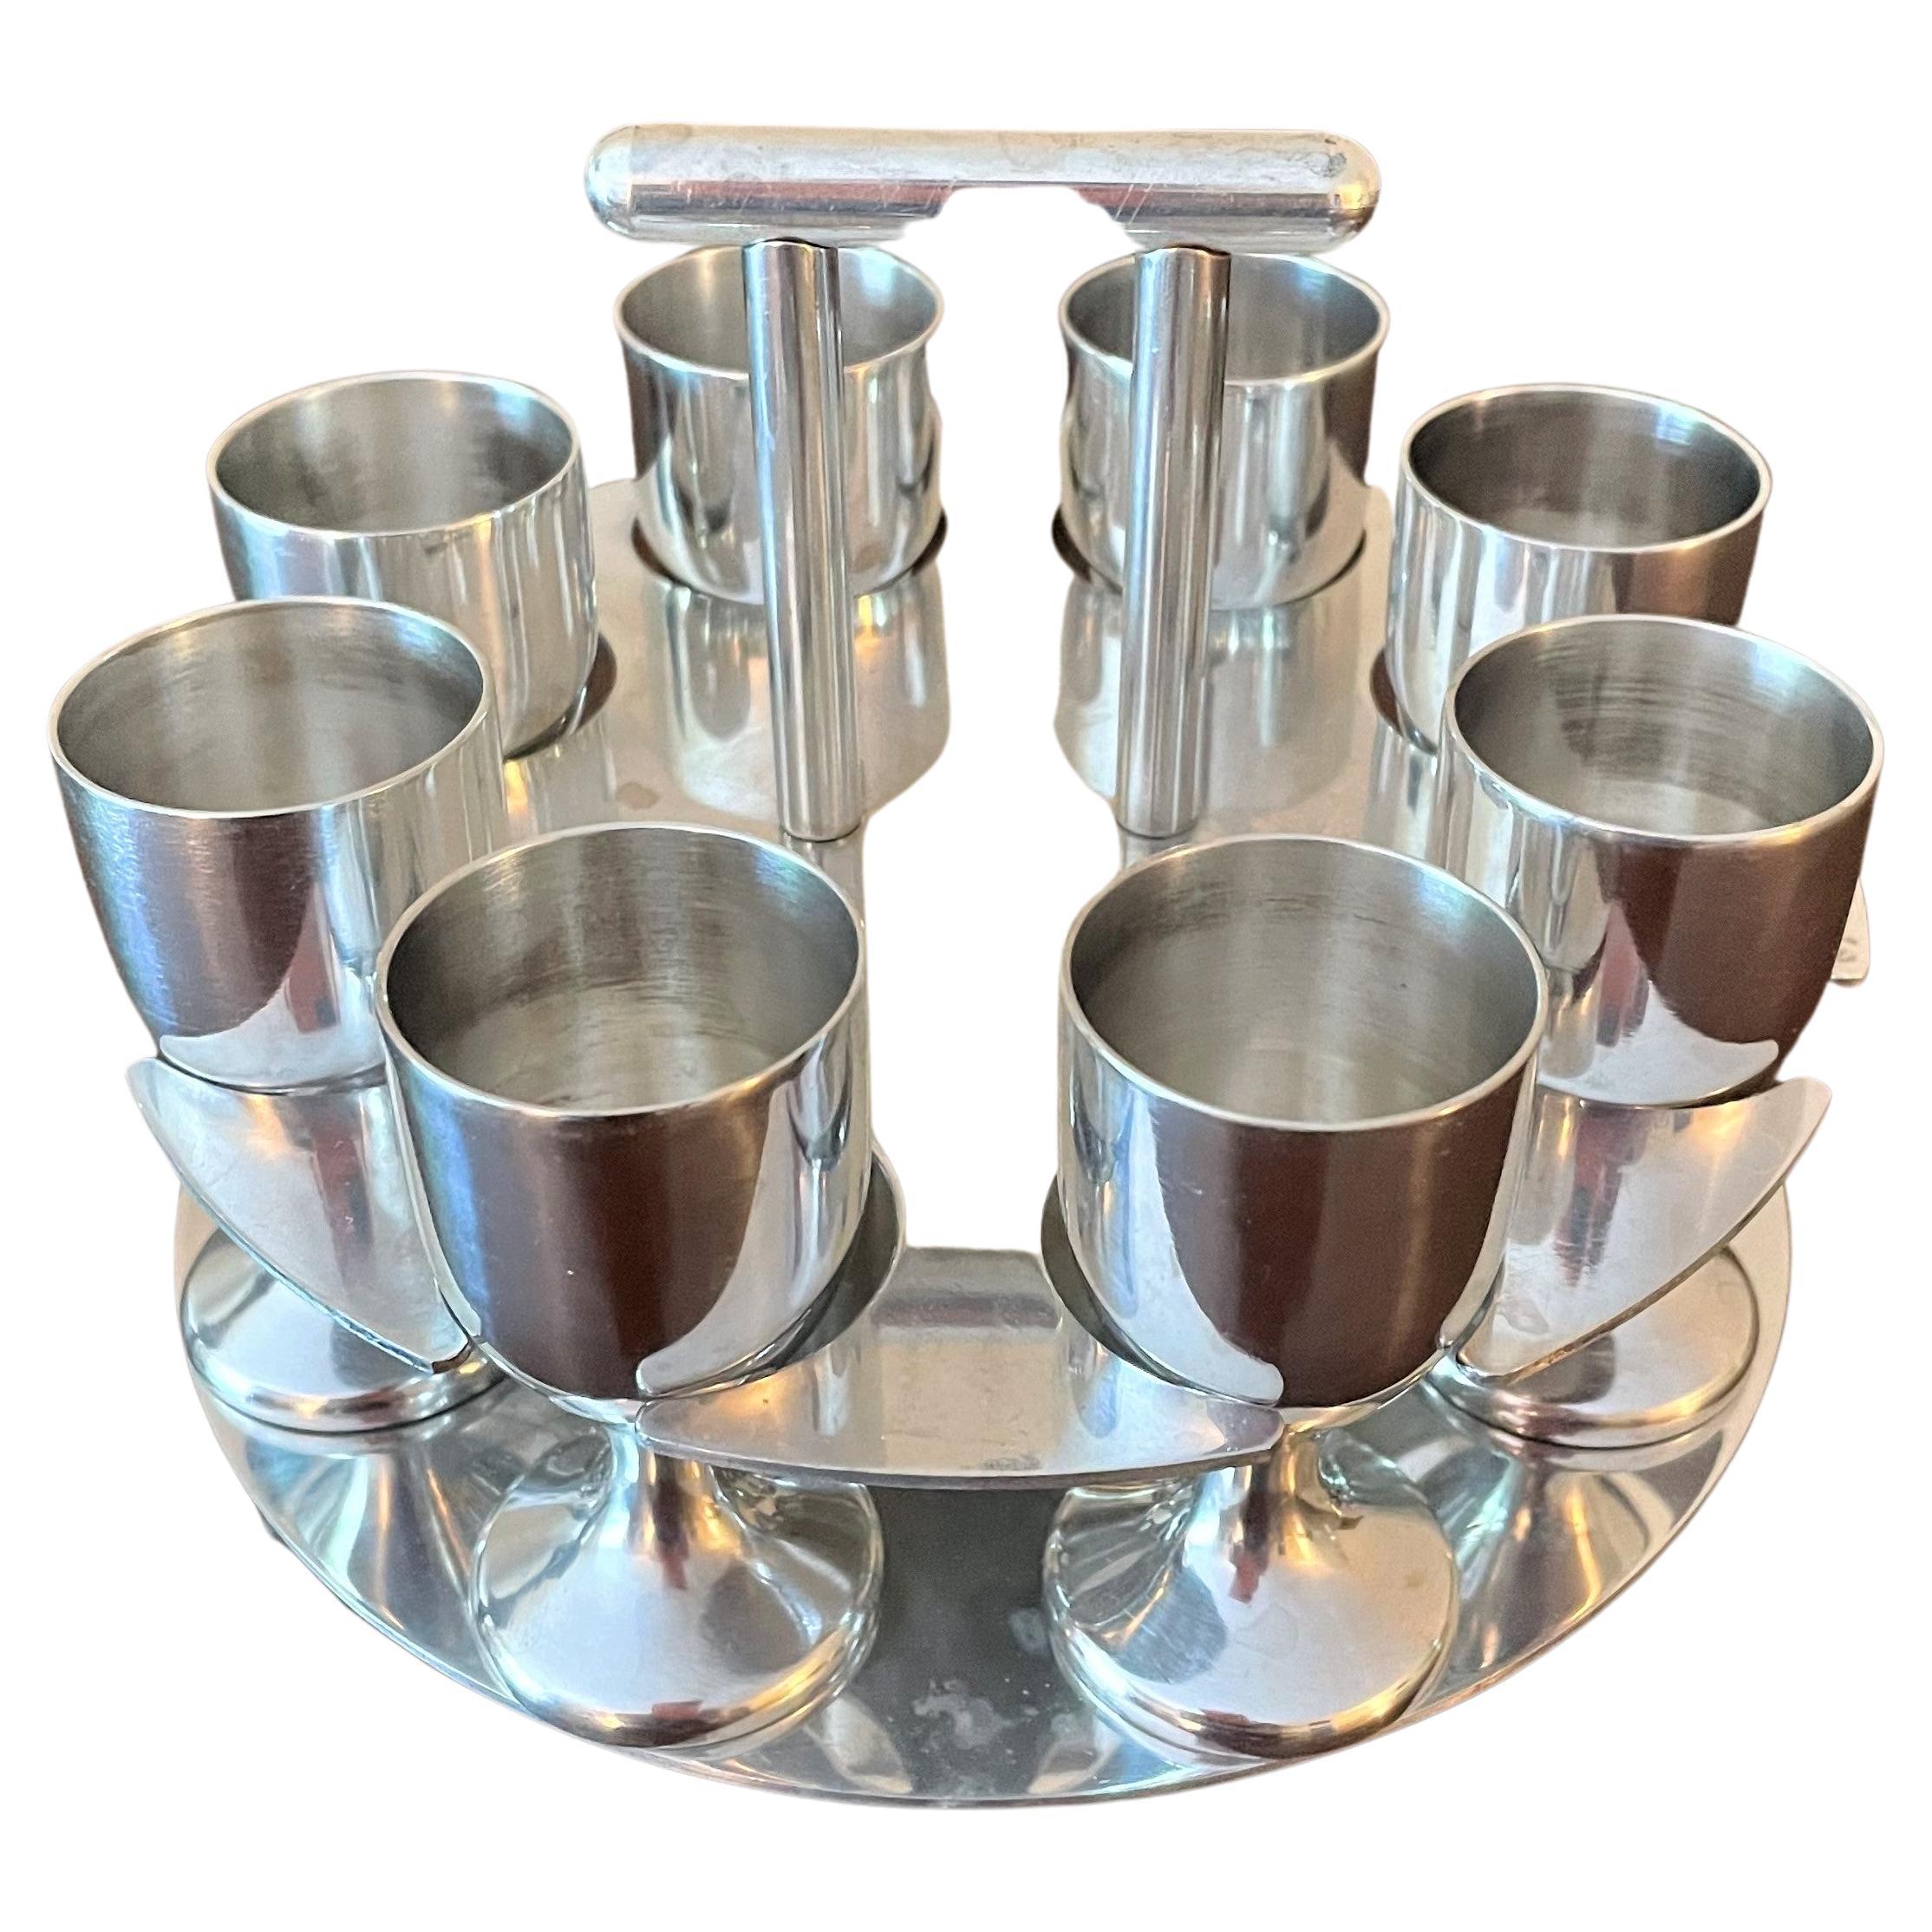 This set of 8 stainless steel cordials / aperitifs or shot glasses is attributed to Arne Jacobsen, the sought-after mid-century Danish architect and designer of the Functionalist Movement. Jacobsen was among the 20th century's most famous designers.